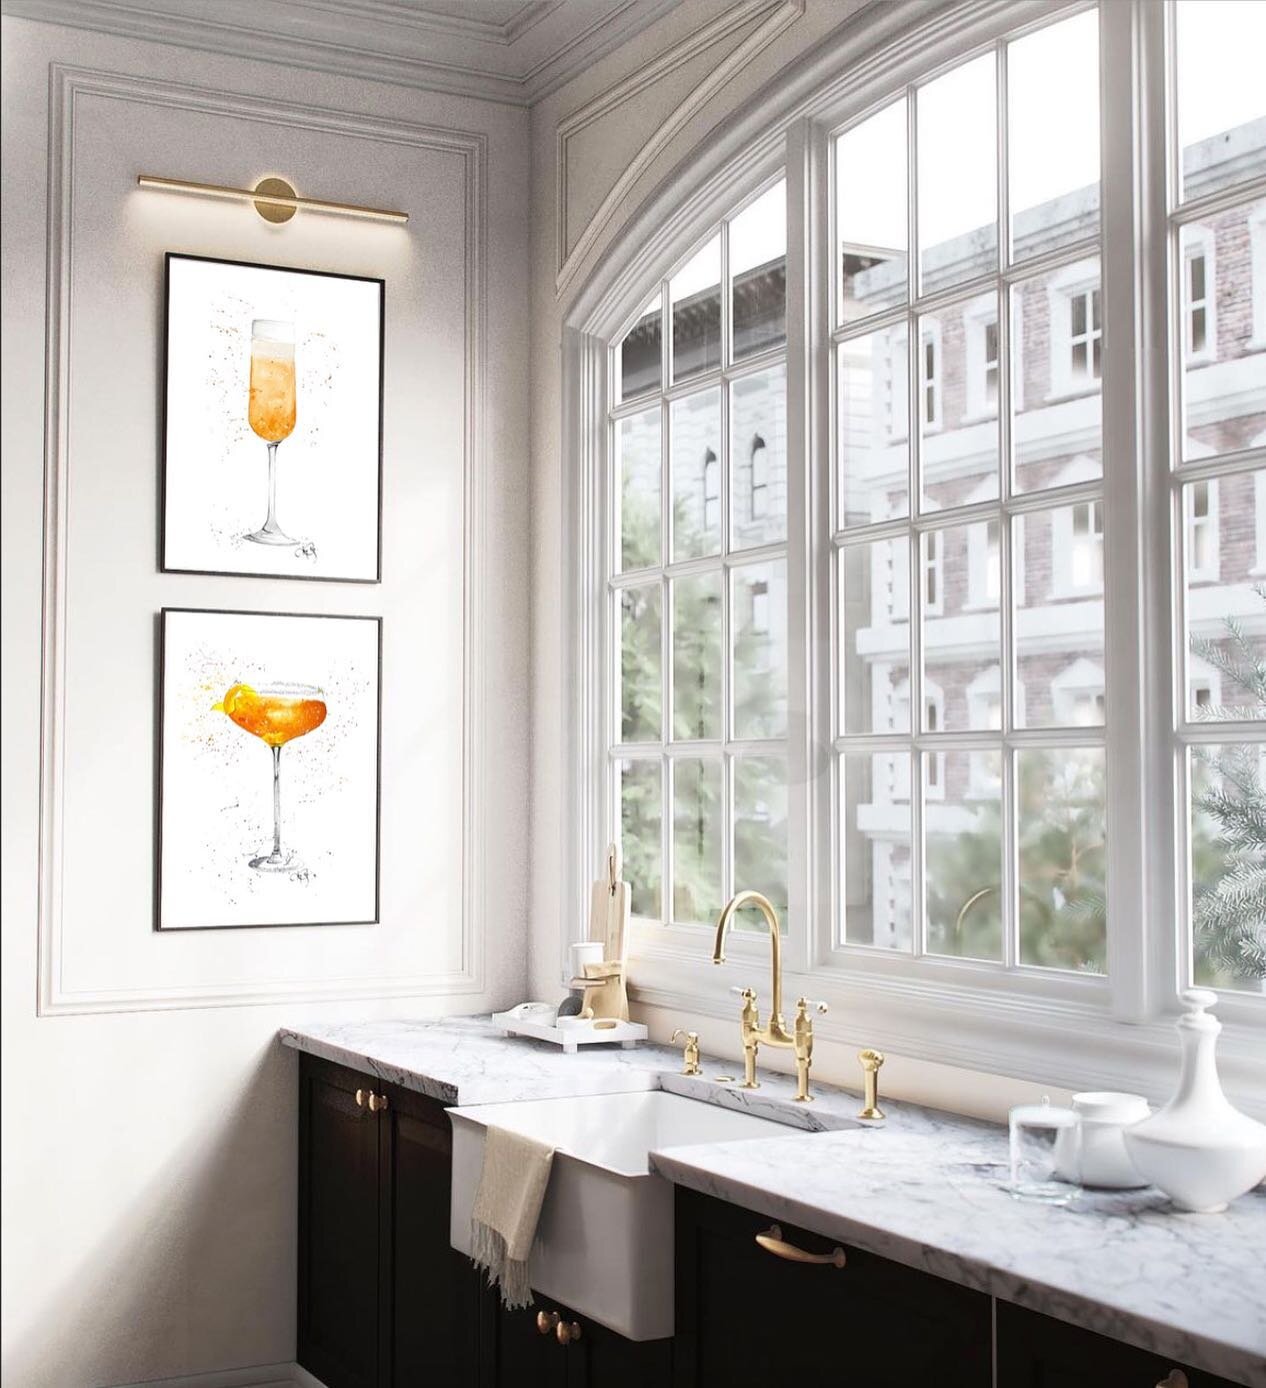 Peach Bellini and Sidecar cocktails, perfect with any neutral, golden, yellow or orange tones. Discover the entire Cocktail Club Collection at www.amyelisestudio.co.uk

#Wallart #wallartdecor #interiorstyling #interiordesign #interiordecor #fashionar